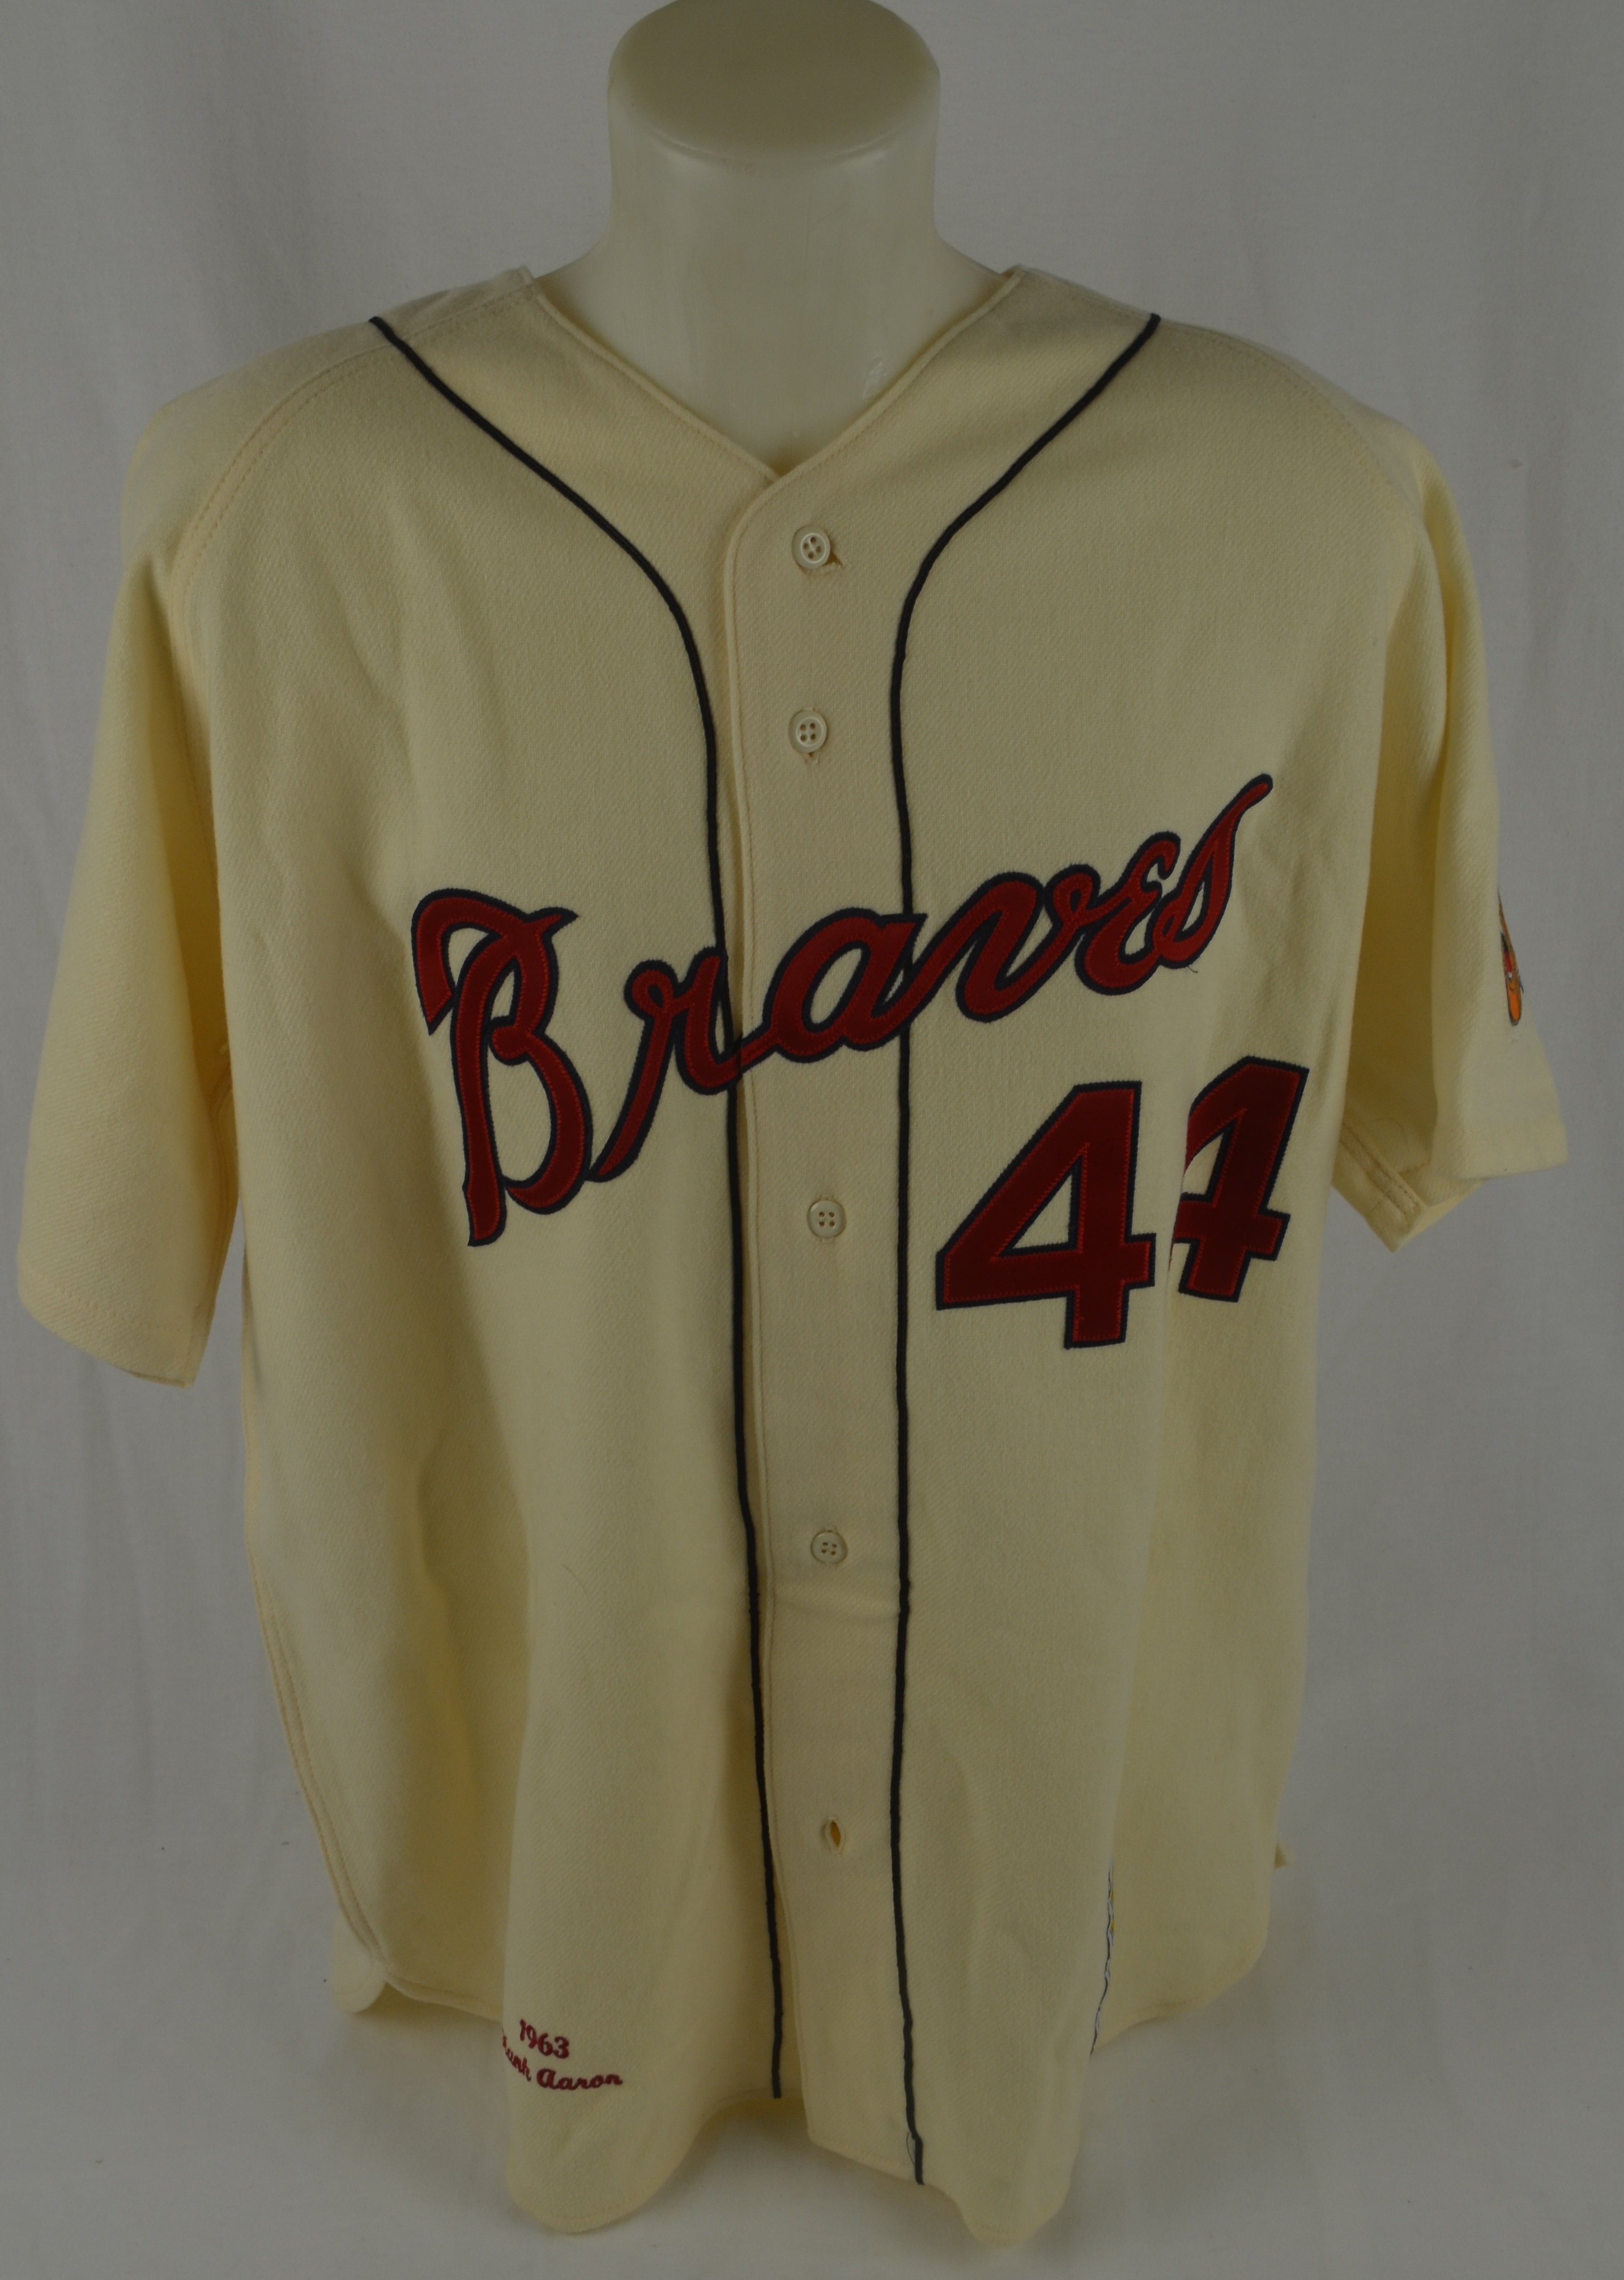 Hank Aaron Milwaukee Braves Autographed Mitchell and Ness 1963